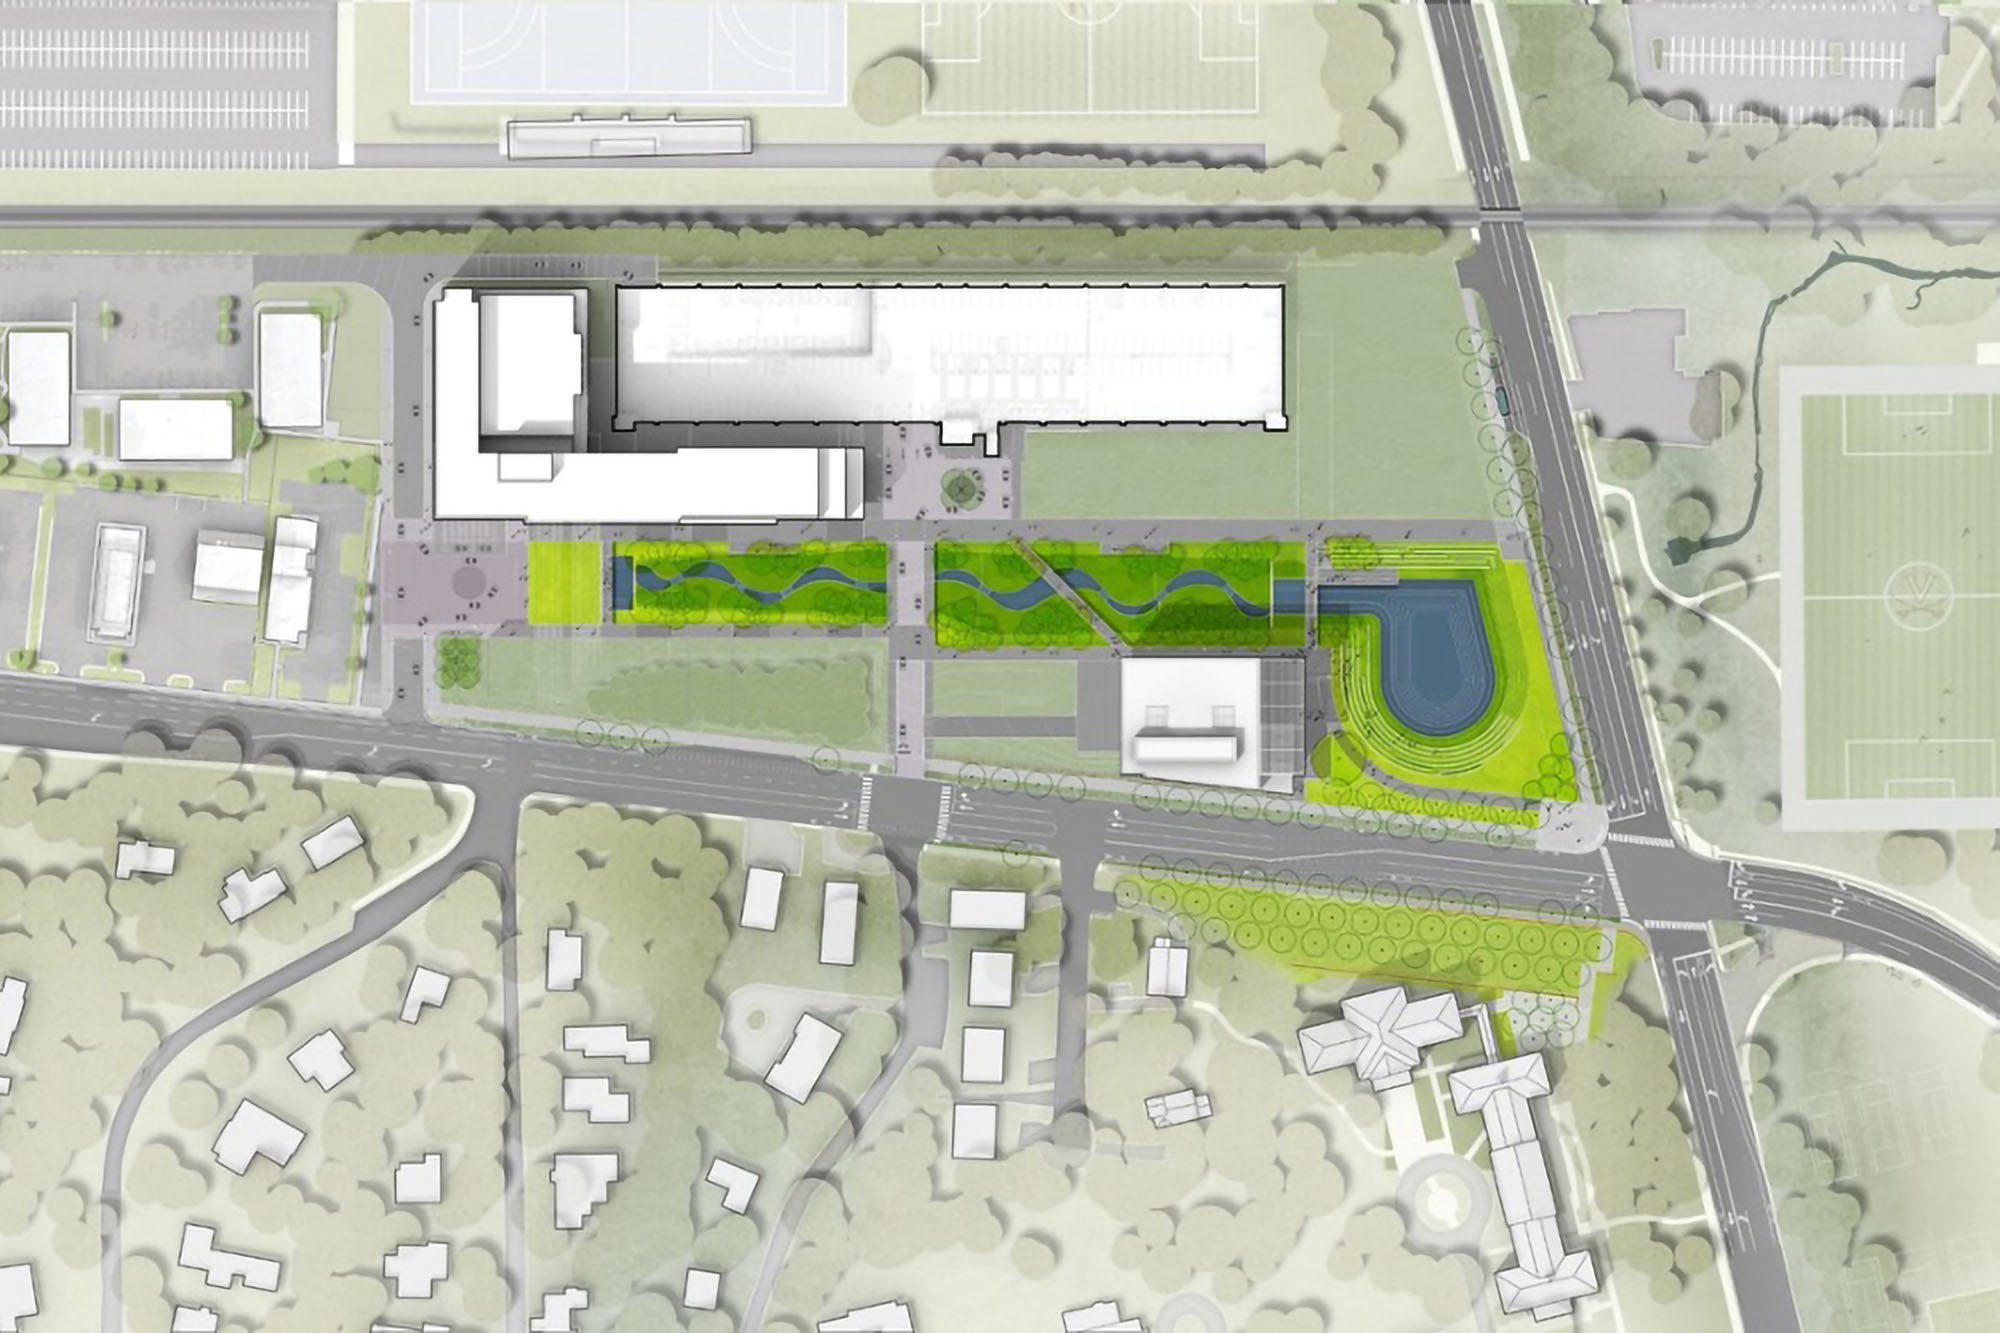 Illustration of where the School of Data science building will be built